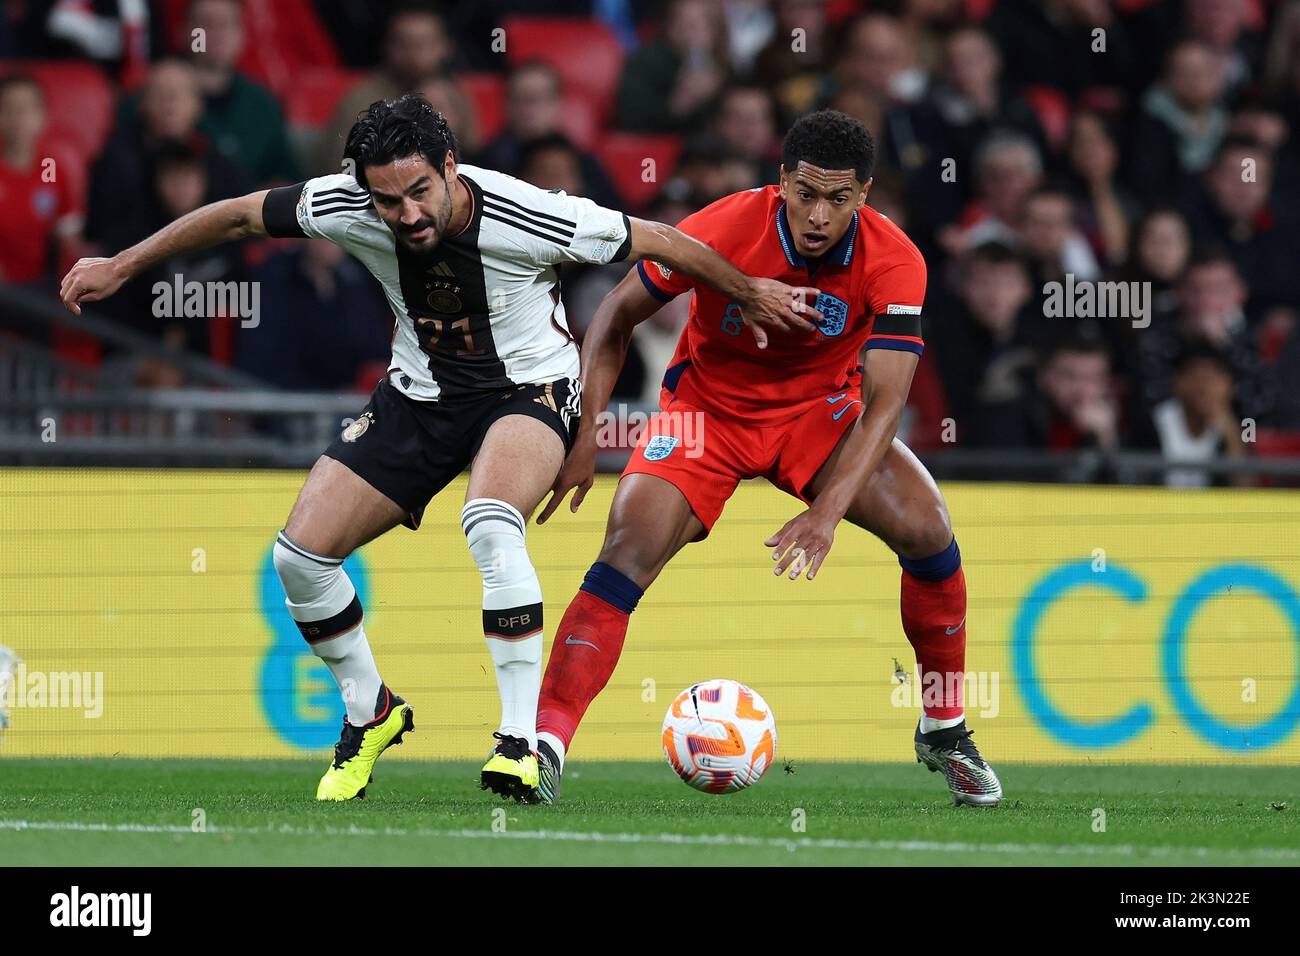 London, UK. 26th Sep, 2022. Jude Bellingham of England (r) & Ilkay Gundogan of Germany (l) in action. England v Germany, UEFA Nations league International group C match at Wembley Stadium in London on Monday 26th September 2022. Editorial use only. pic by Andrew Orchard/Andrew Orchard sports photography/Alamy Live News Credit: Andrew Orchard sports photography/Alamy Live News Stock Photo